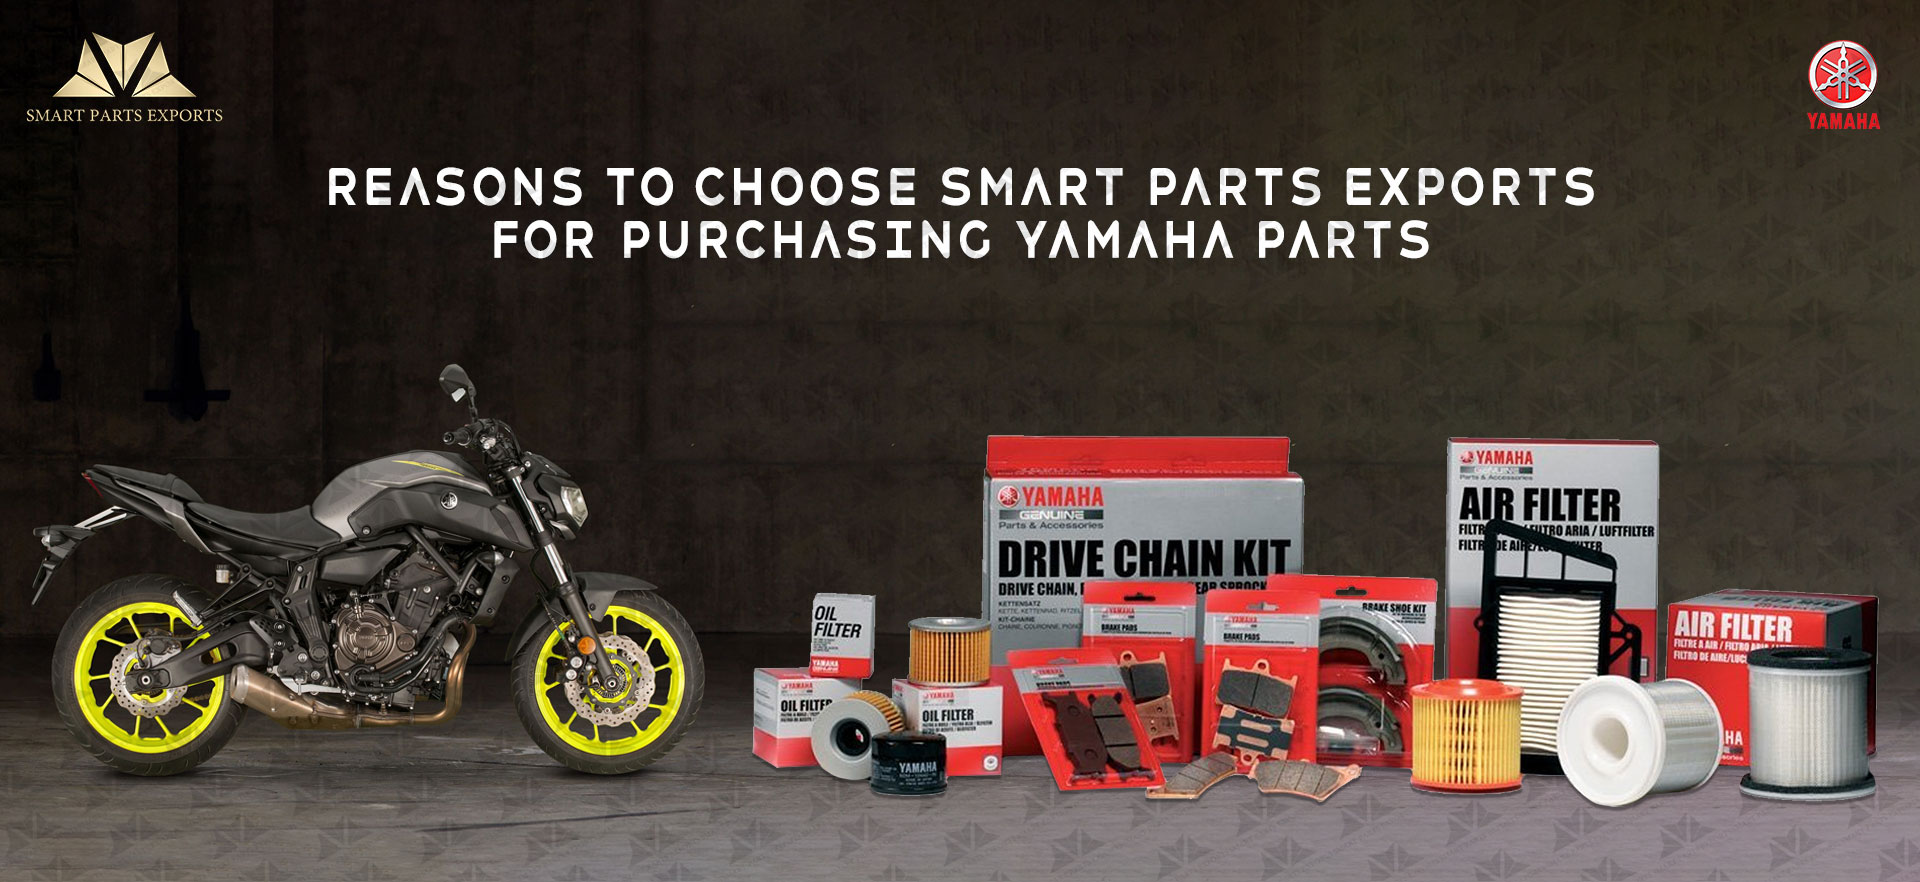 Yamaha Genuine Parts & Accessories Online At the Best Price